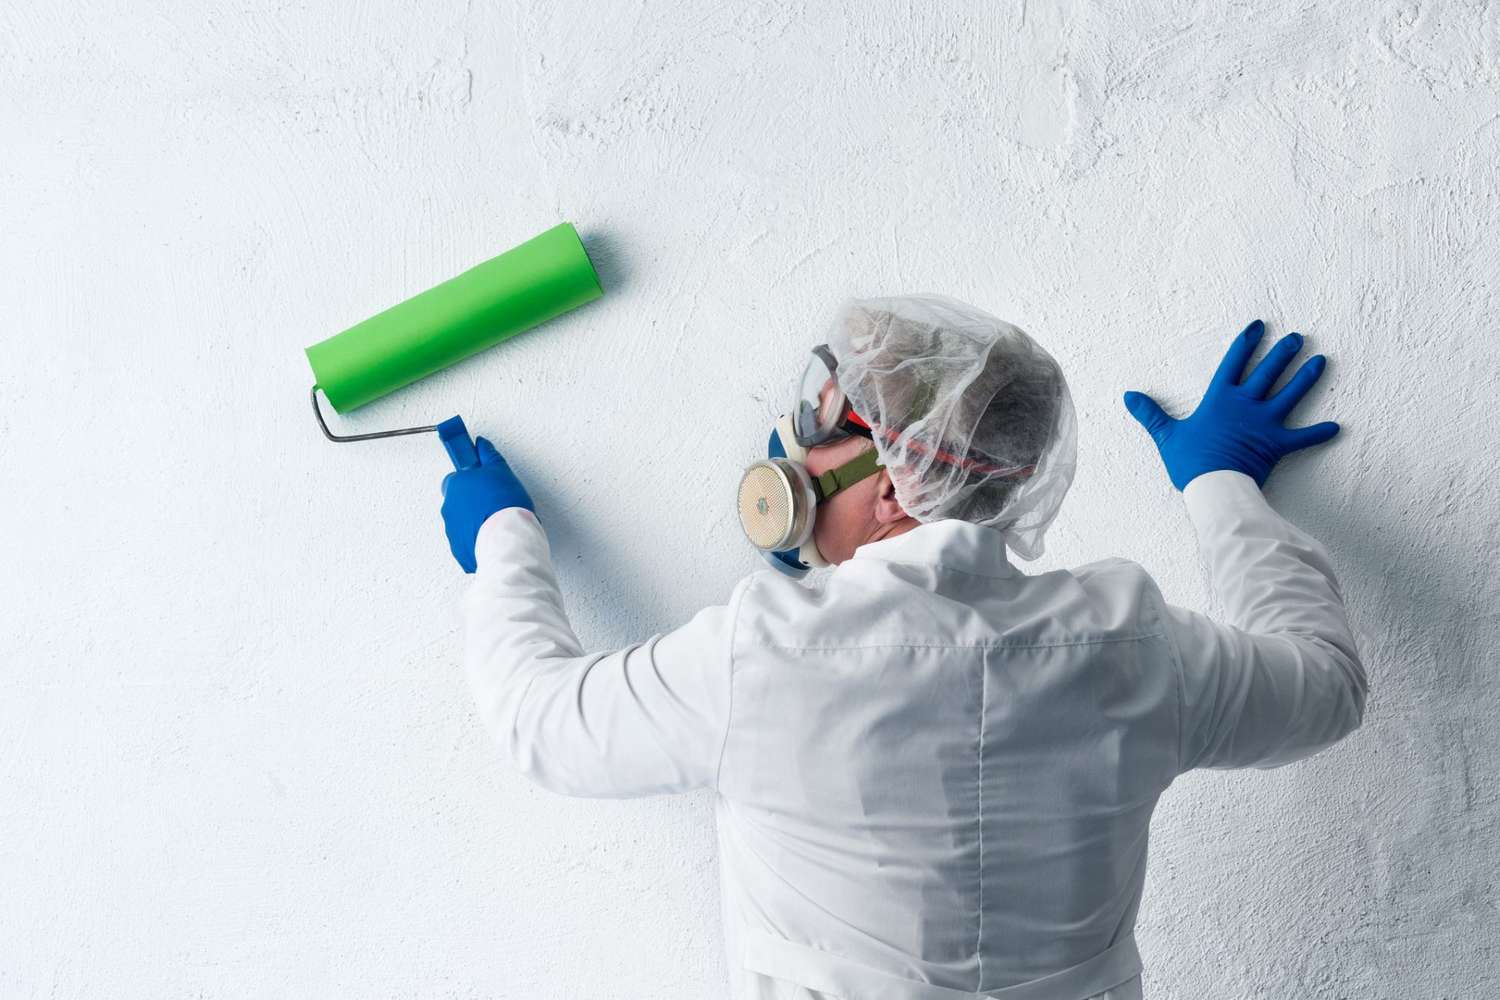 Should You Be Worried About Lead Paint in Your Home? | Real ...